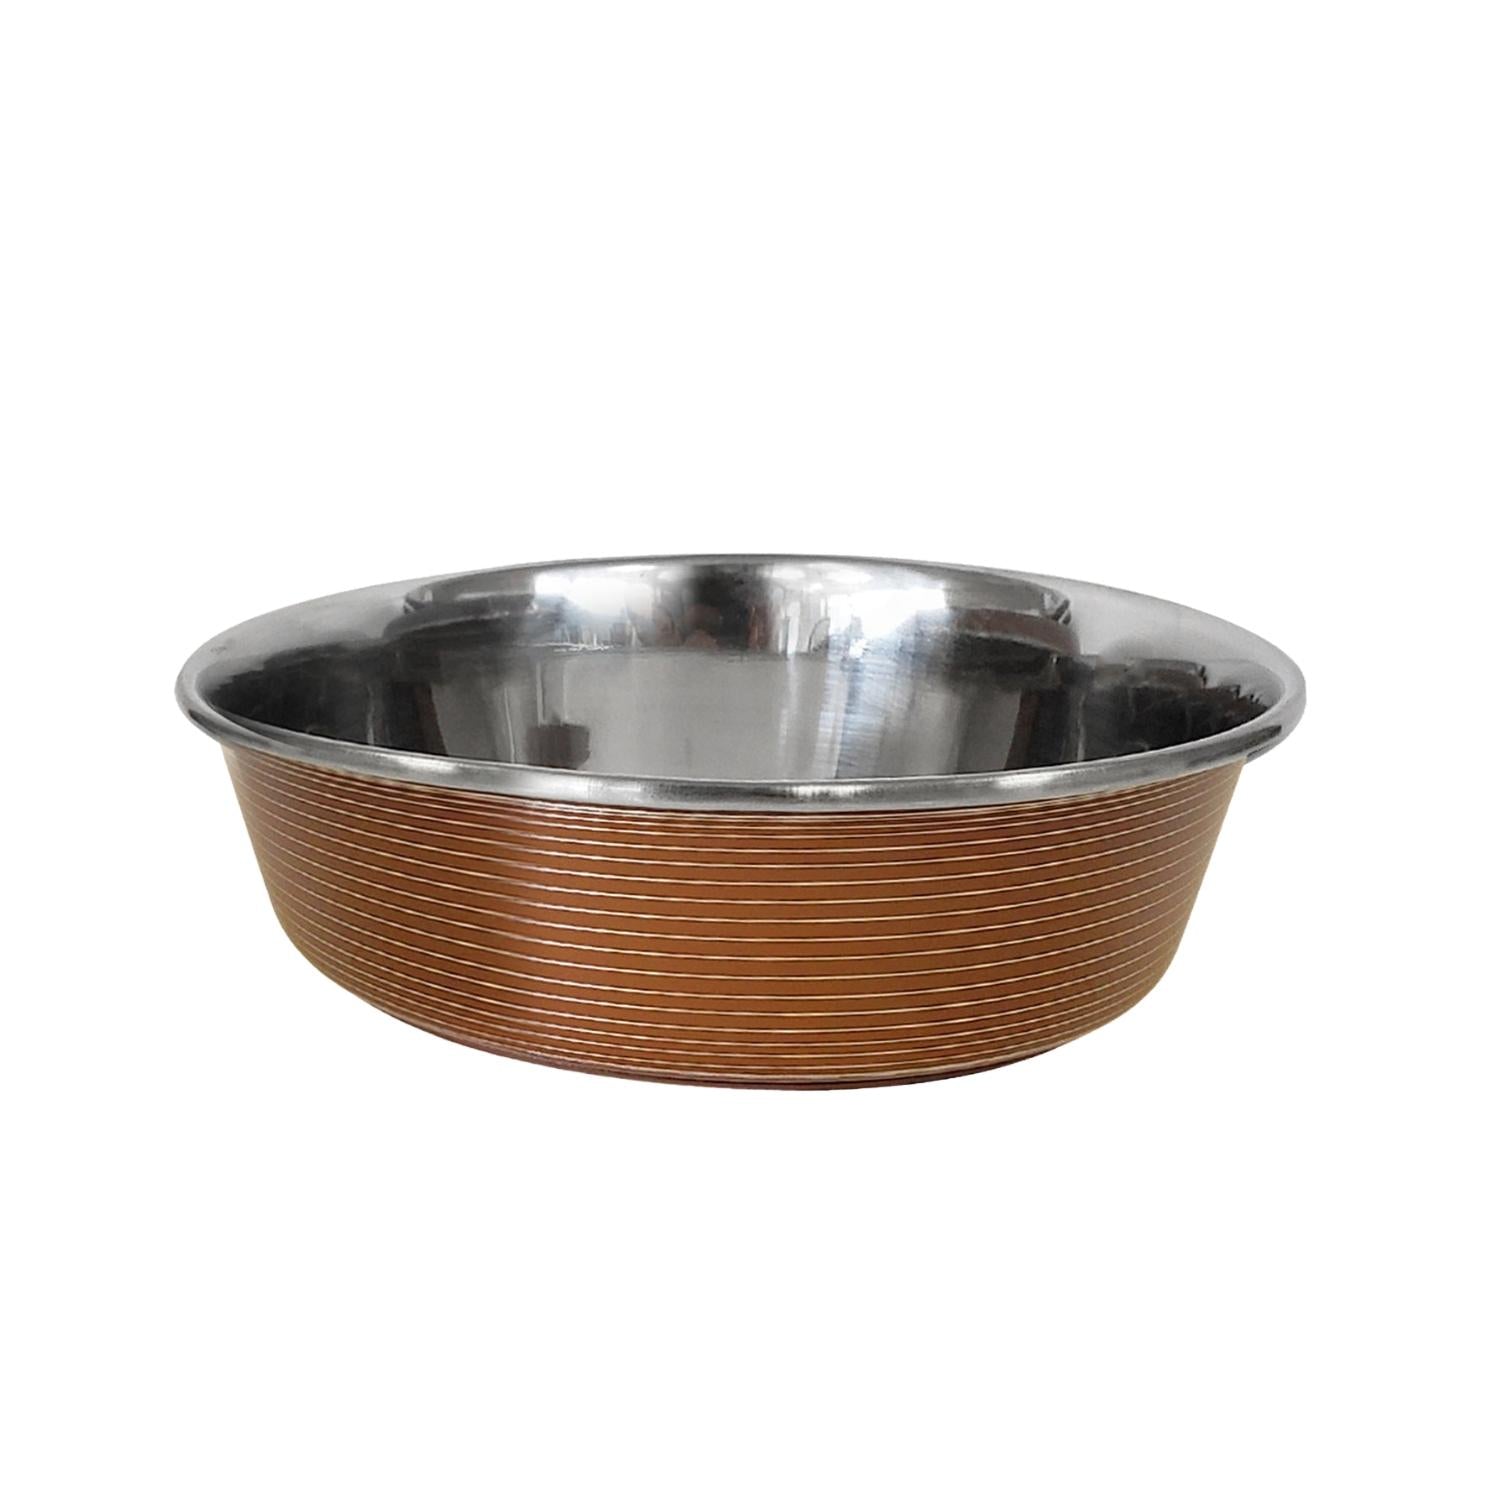 Striped Deluxe Dog Bowl - Stainless Steel - Brown - 29 oz-0